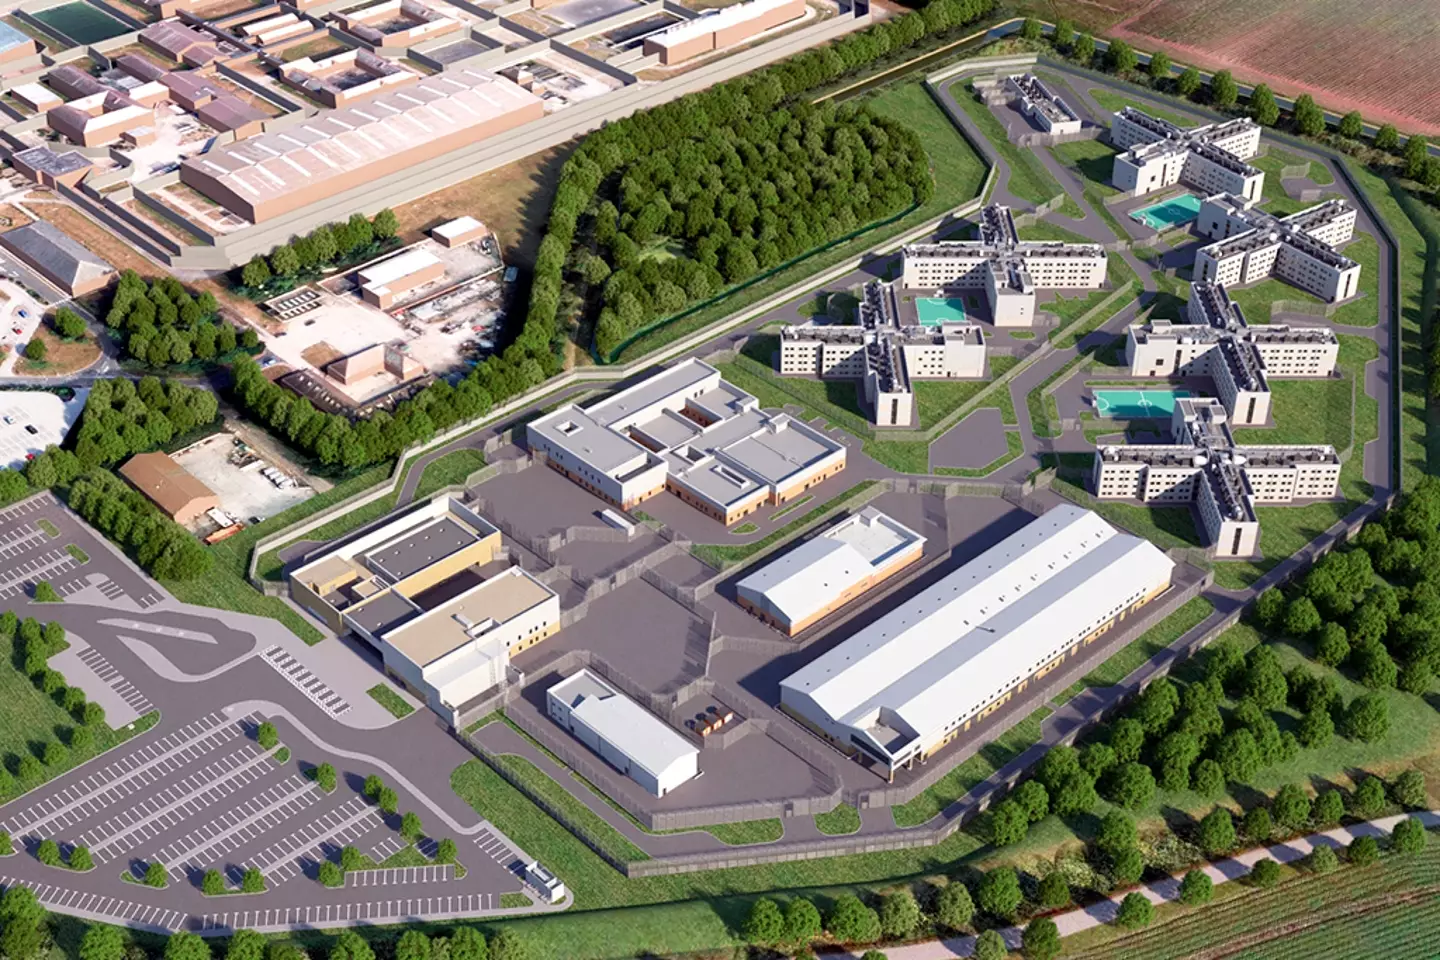 The new 'smart prison' that is due to open in East Yorkshire in 2025.